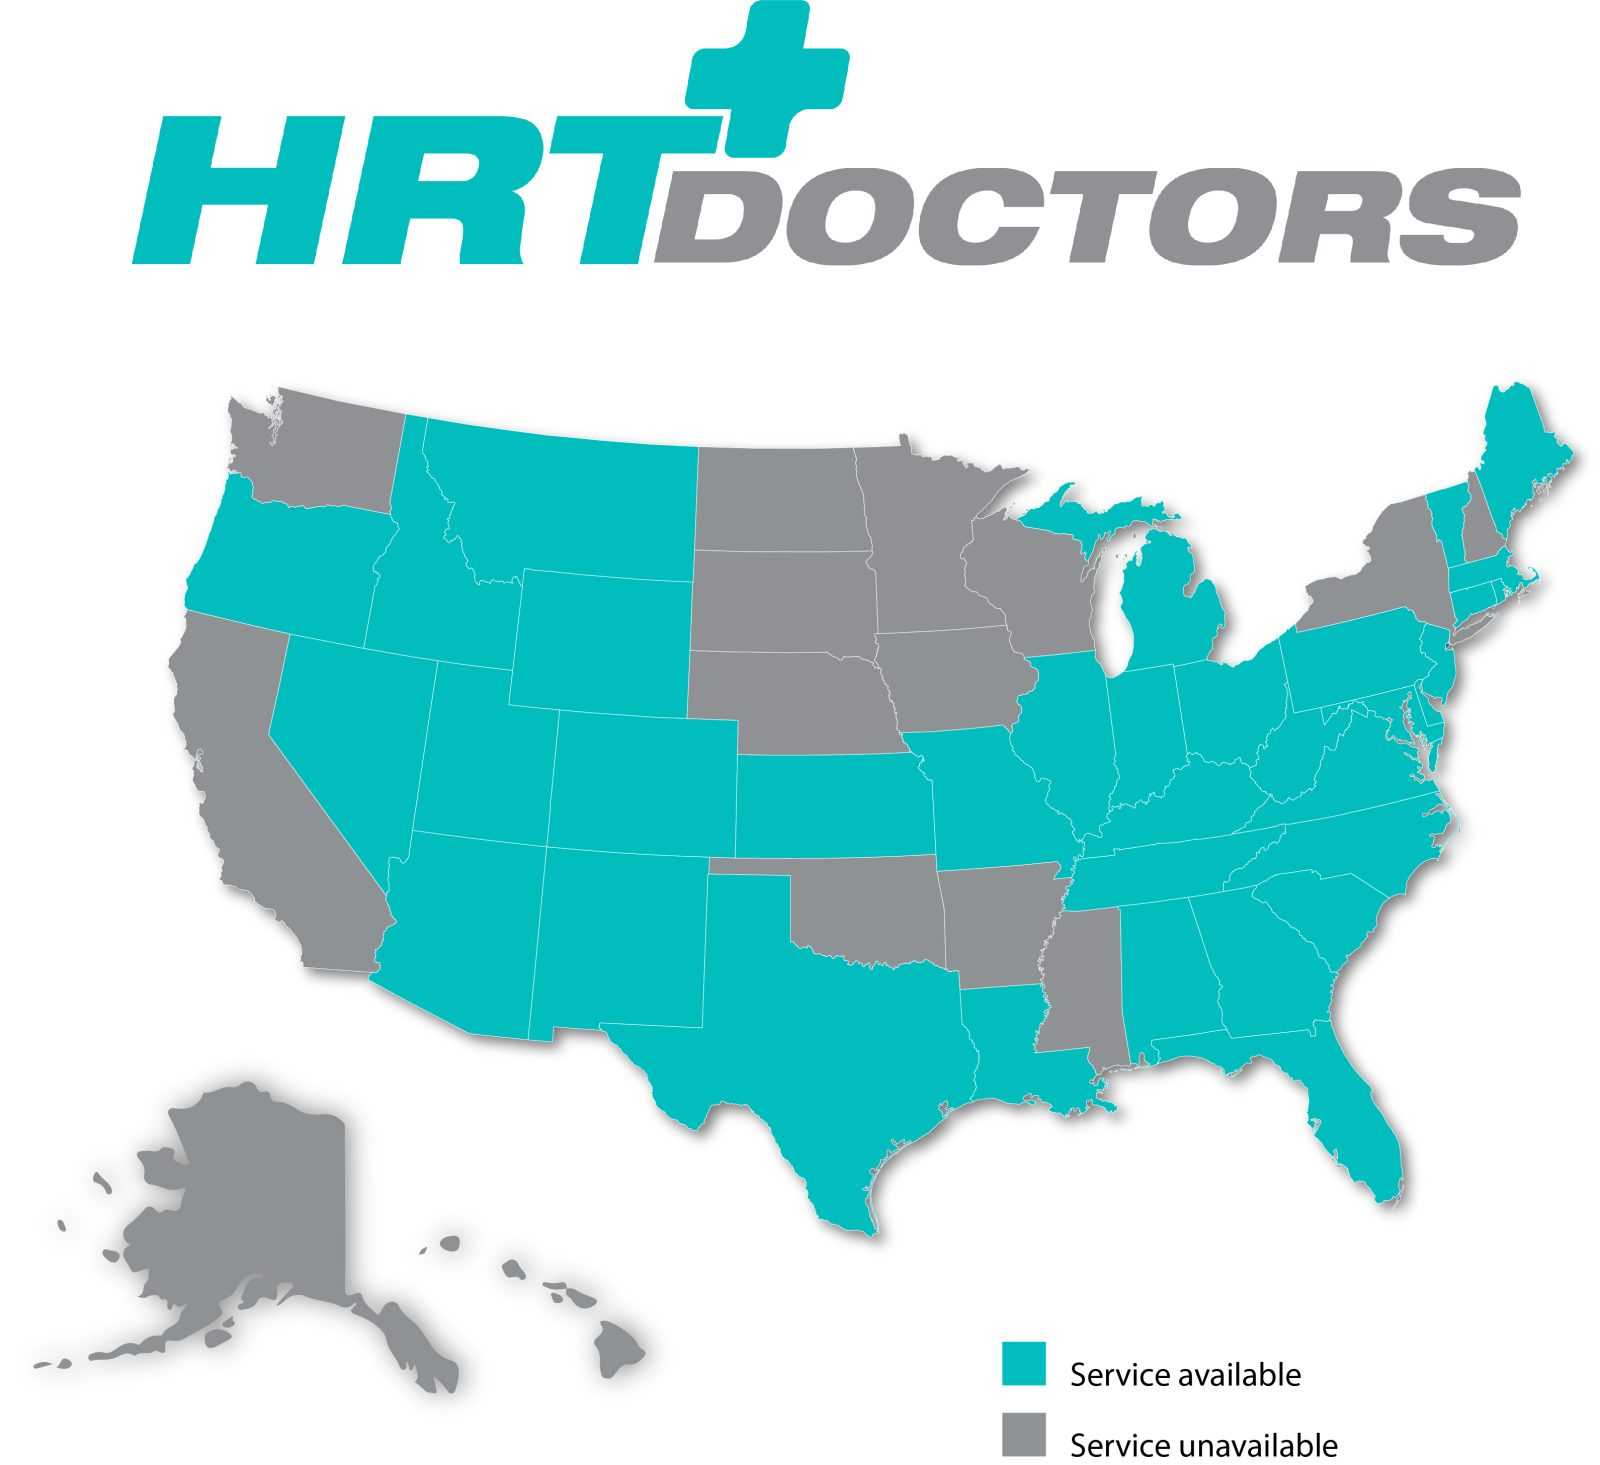 hrt doctors are available in almost every state